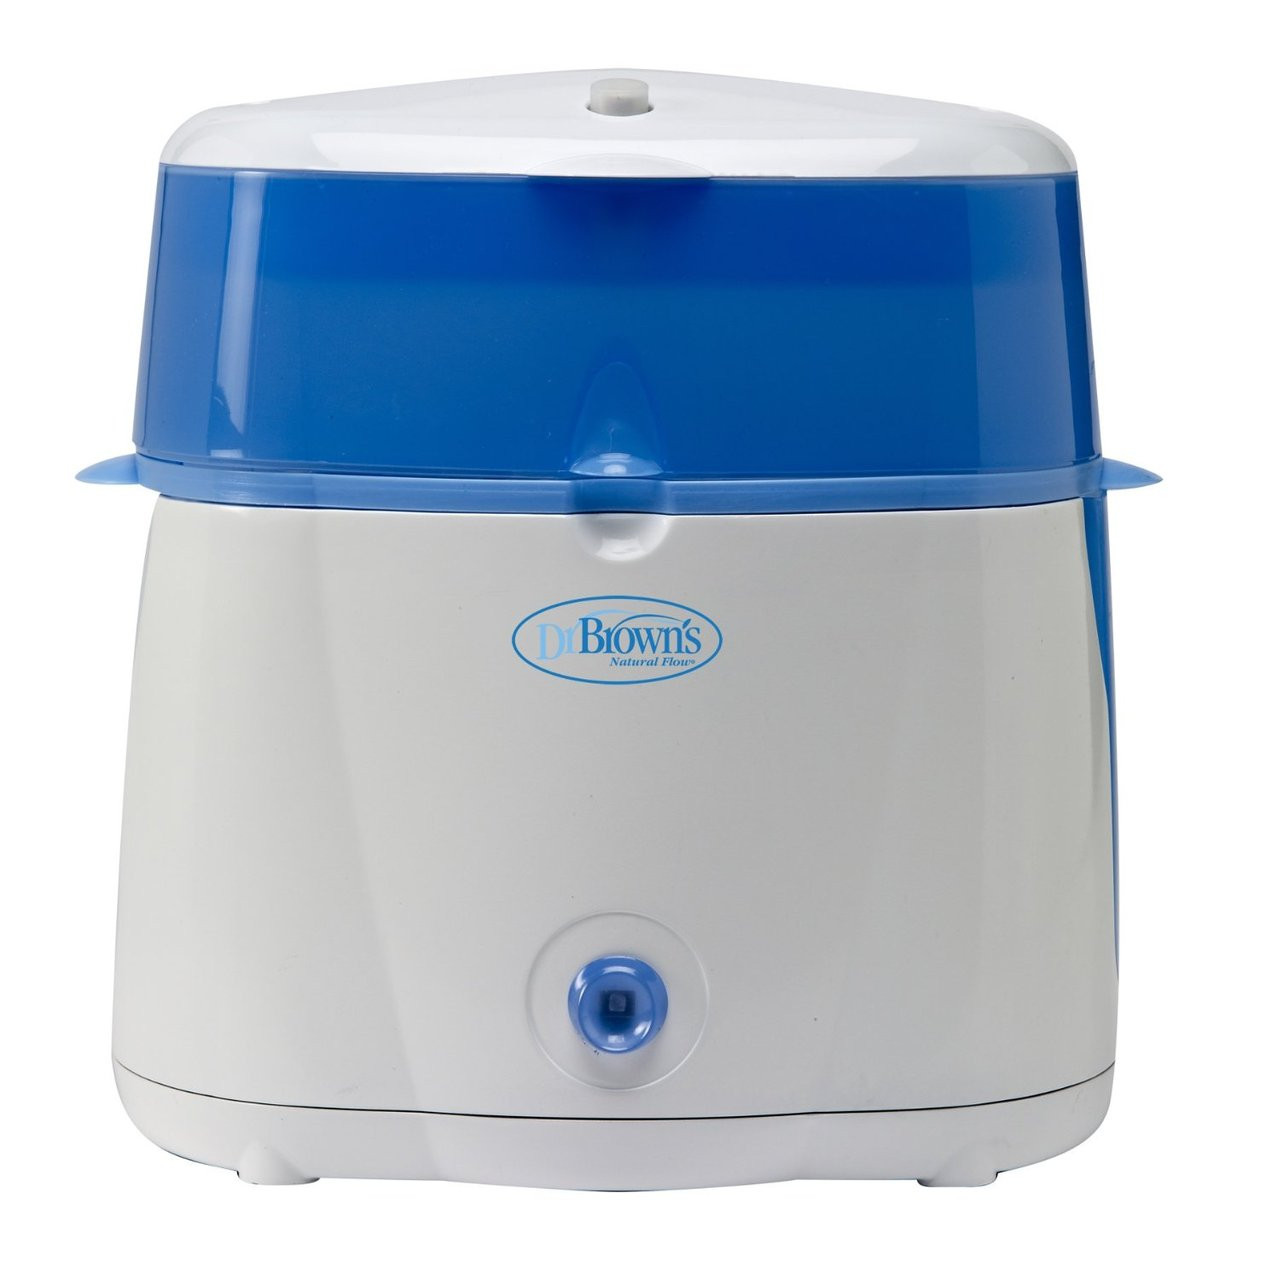 https://cdn10.bigcommerce.com/s-h30fgwwj/products/857/images/1197/Electric_Sterilizer__74633.1408942002.1280.1280.jpg?c=2